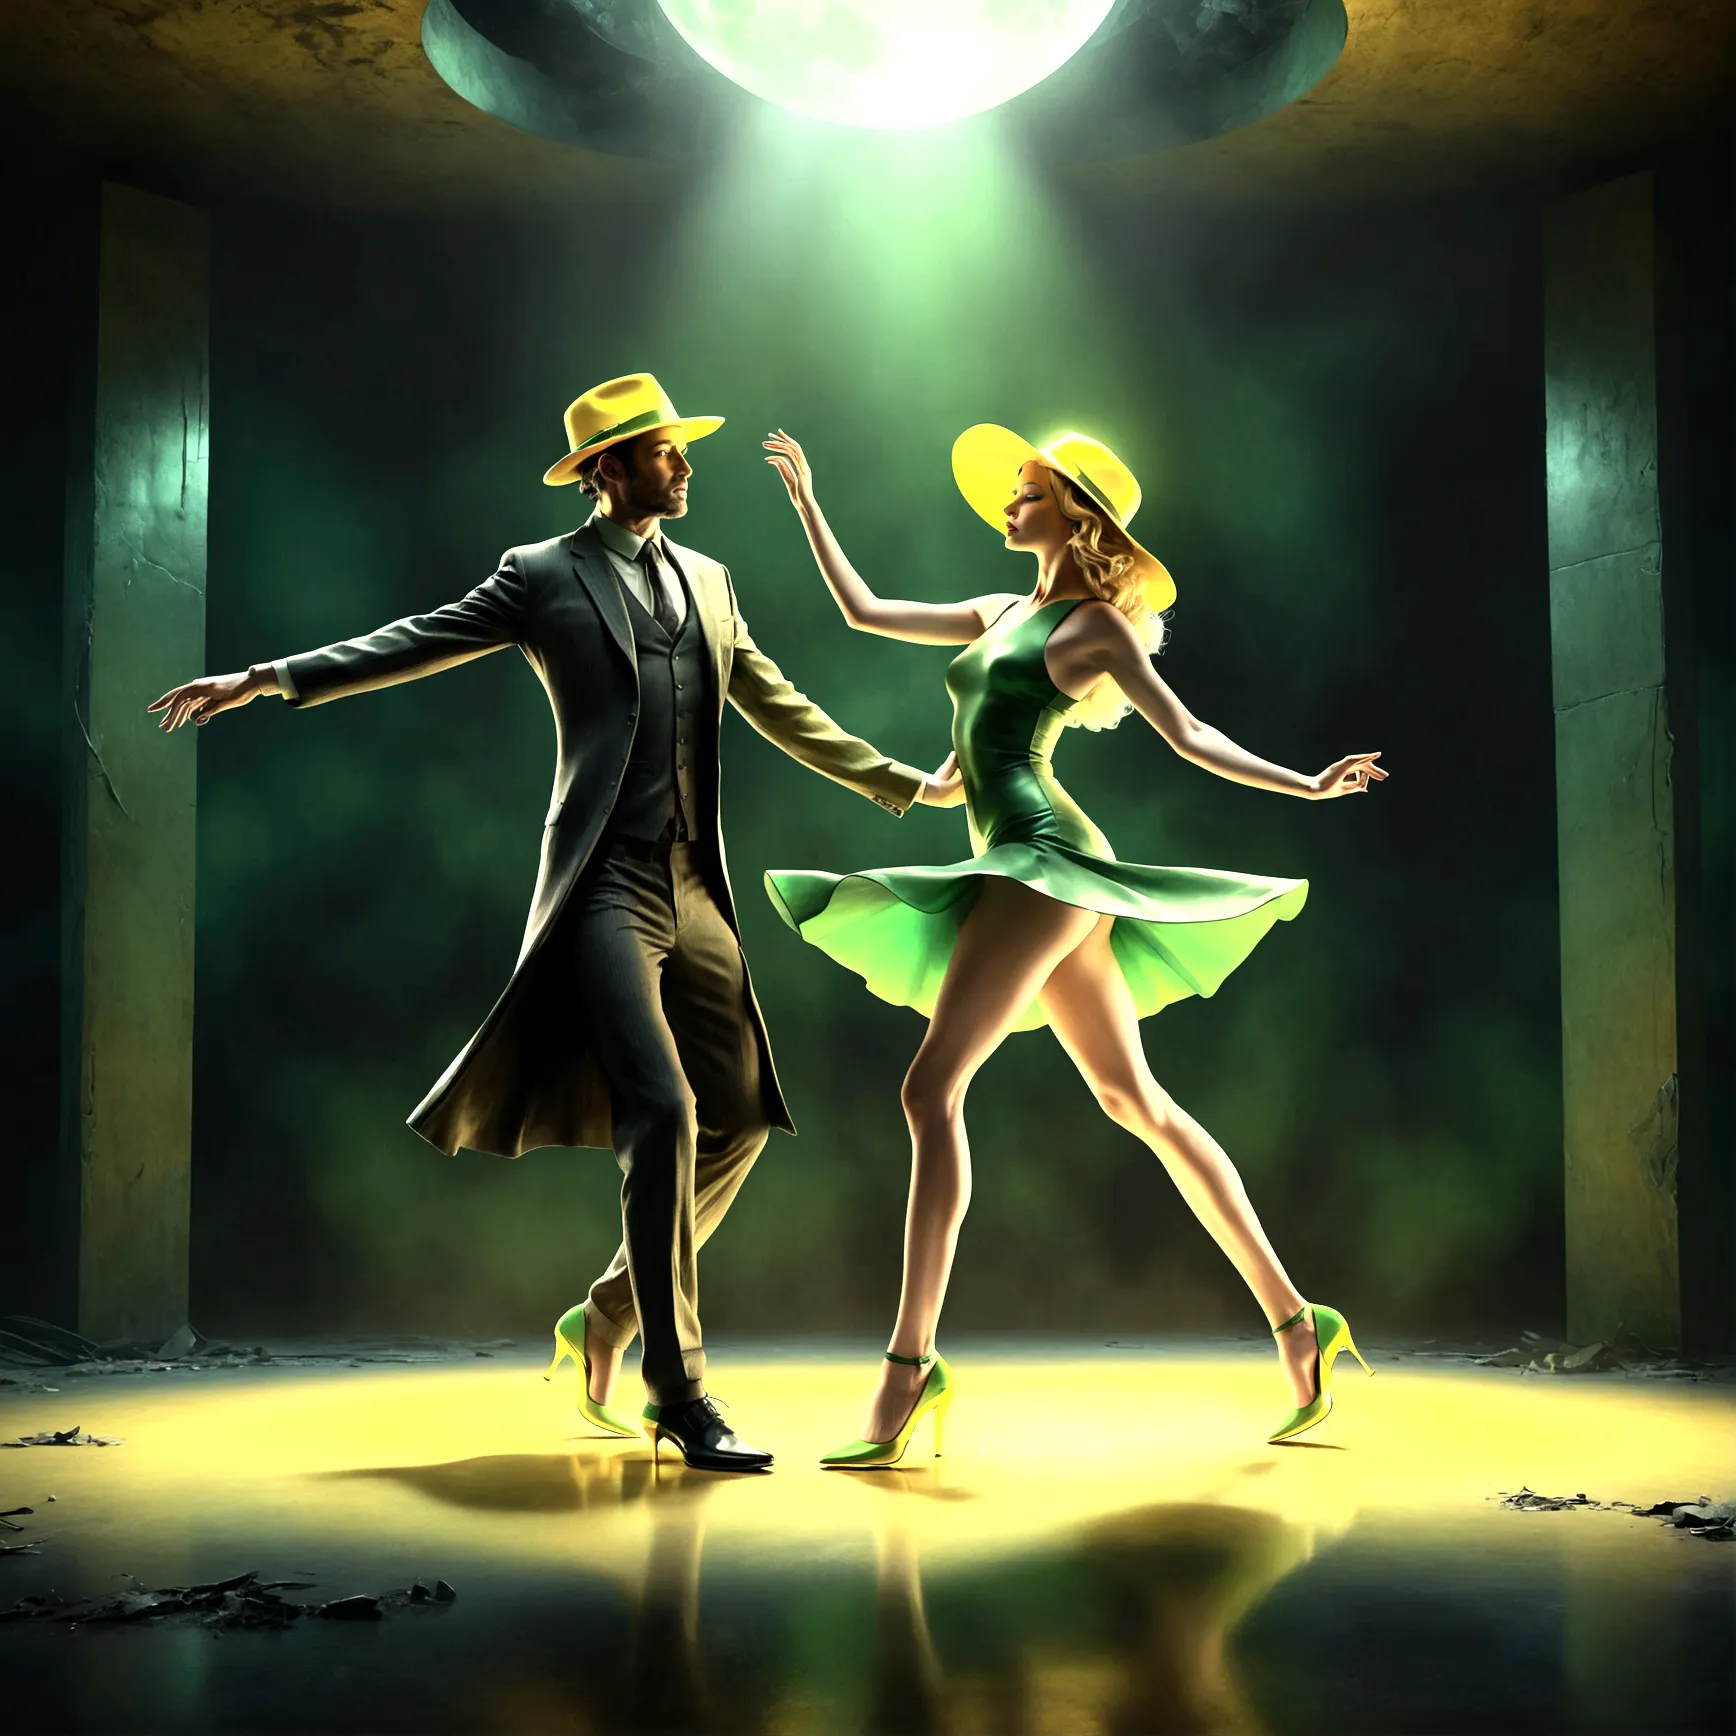 A fascinating 3D image in national style, created as a digital painting shows a mystical couple with empty body, she dances grac...